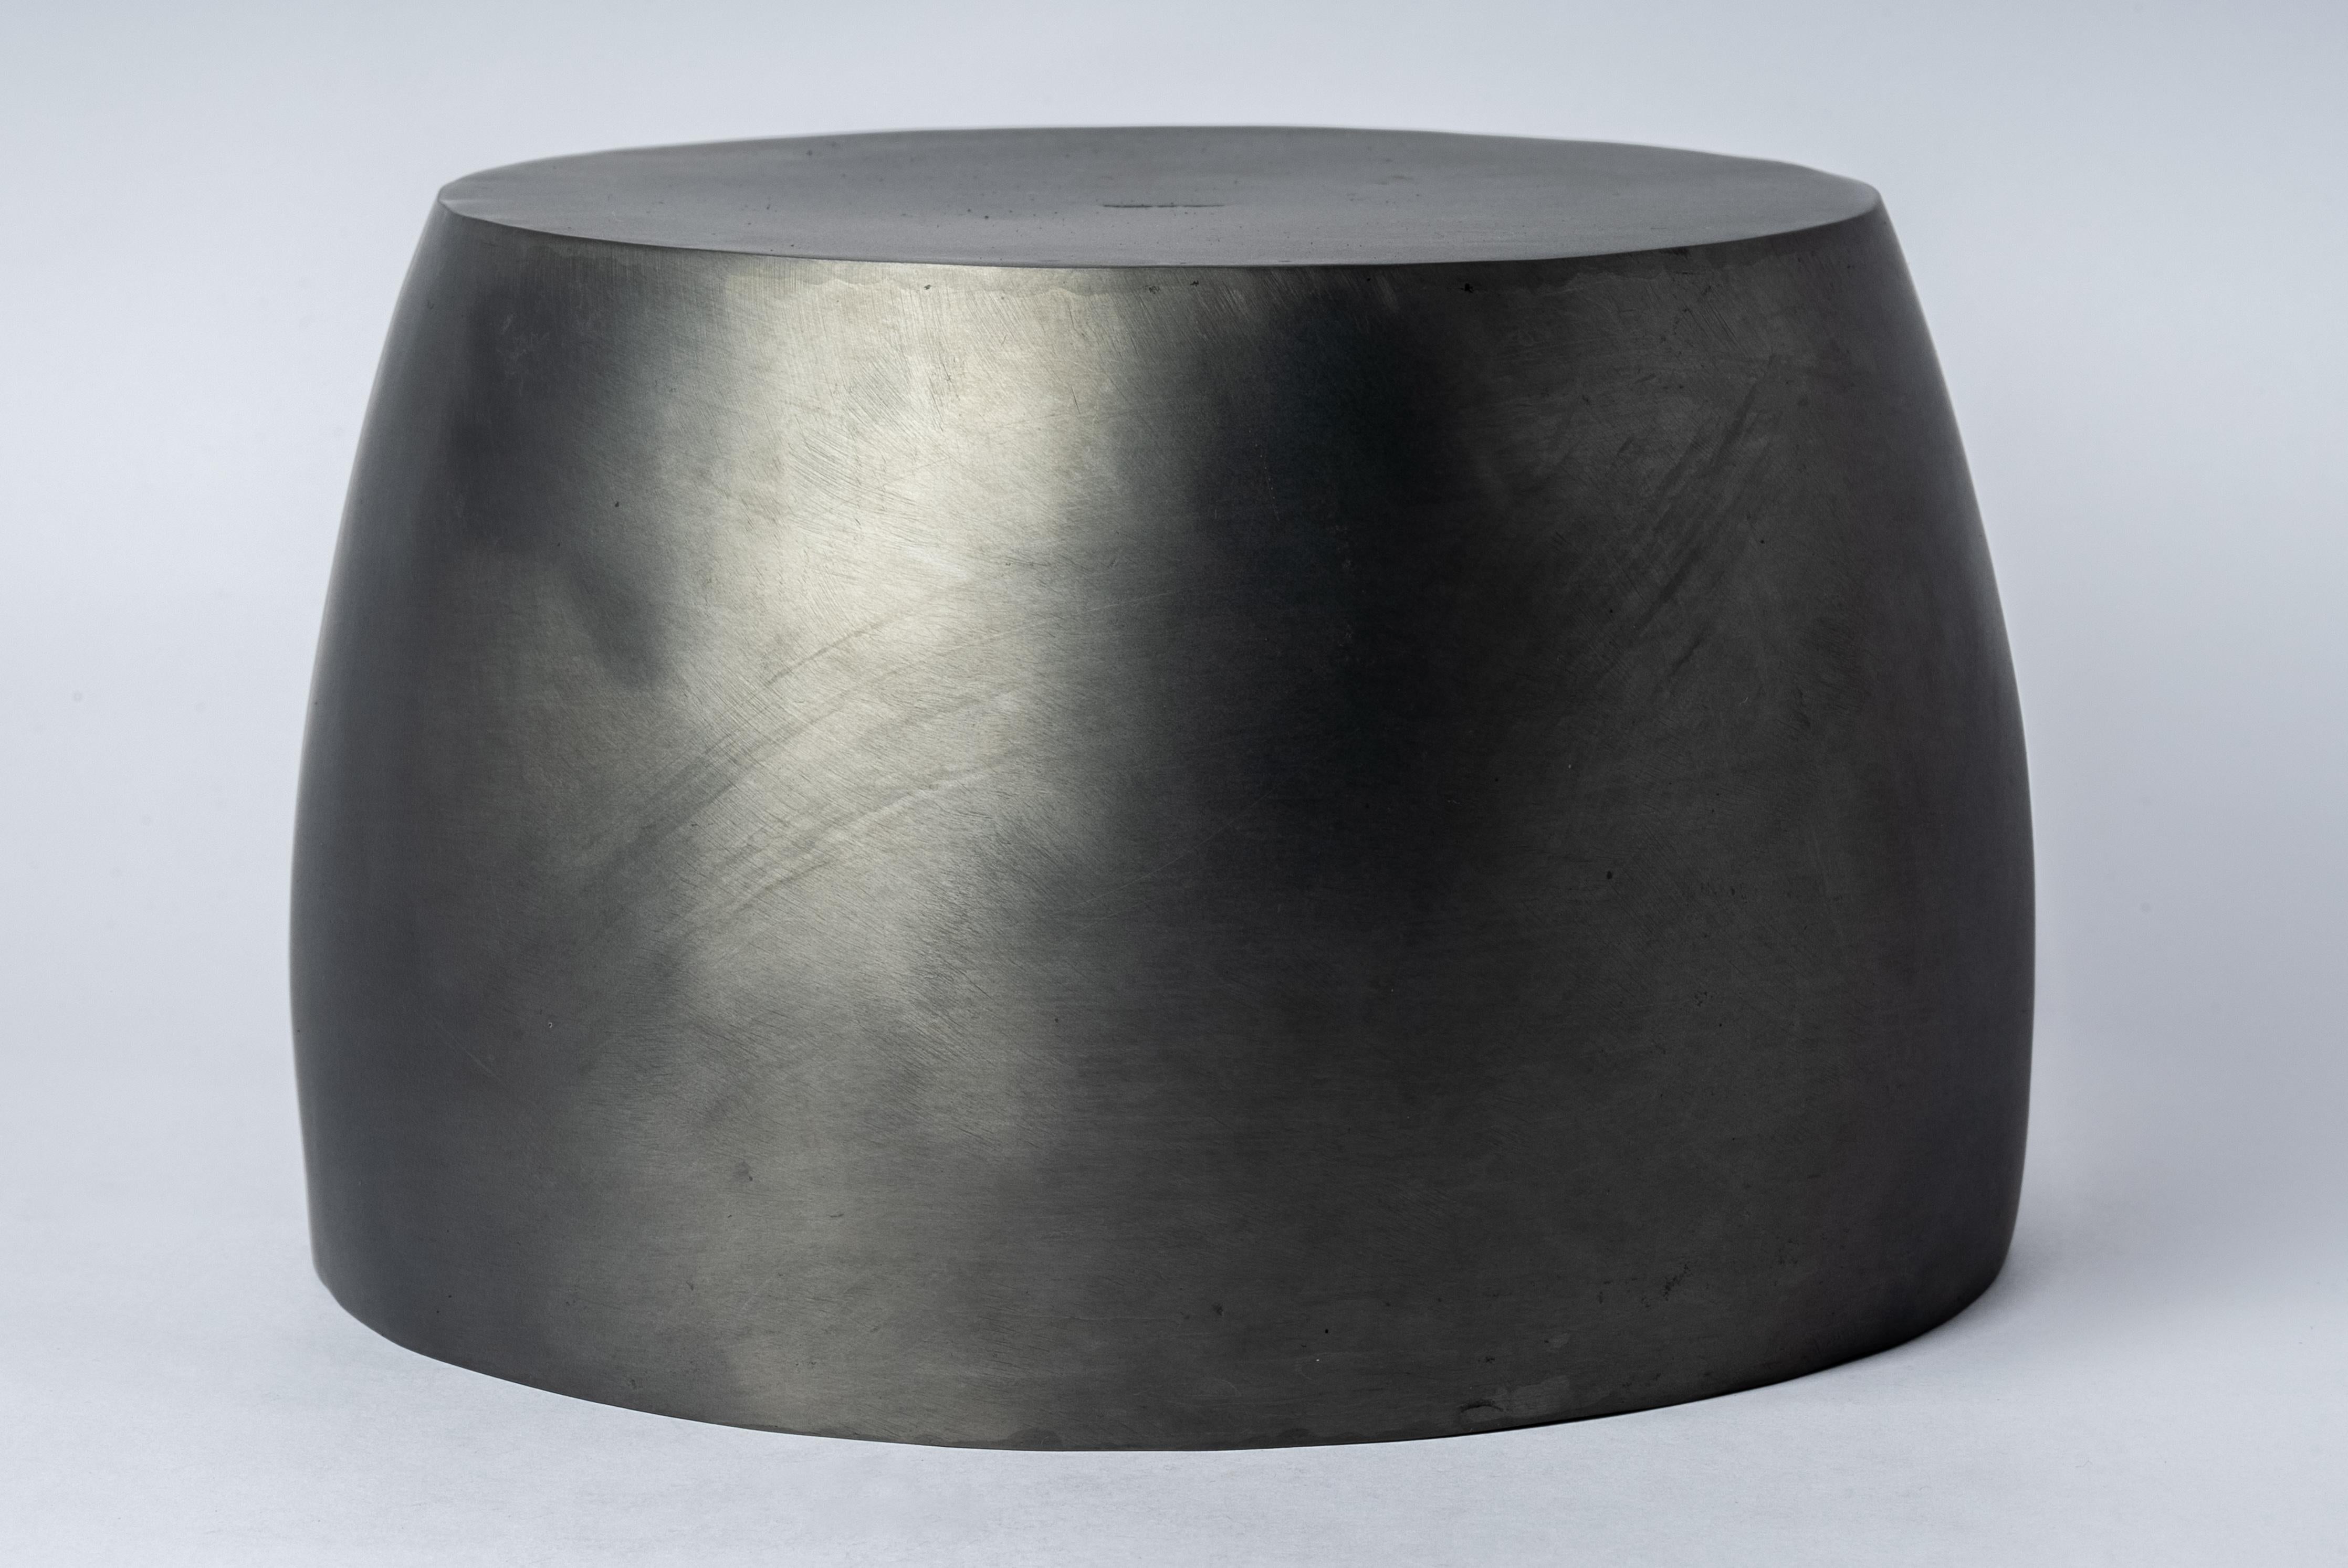 Large Bowl in iron with acid oxidation. This item is hand made from plate iron. This piece is 100% hand fabricated from metal plate; cut into sections and soldered together to make the hollow three dimensional form.